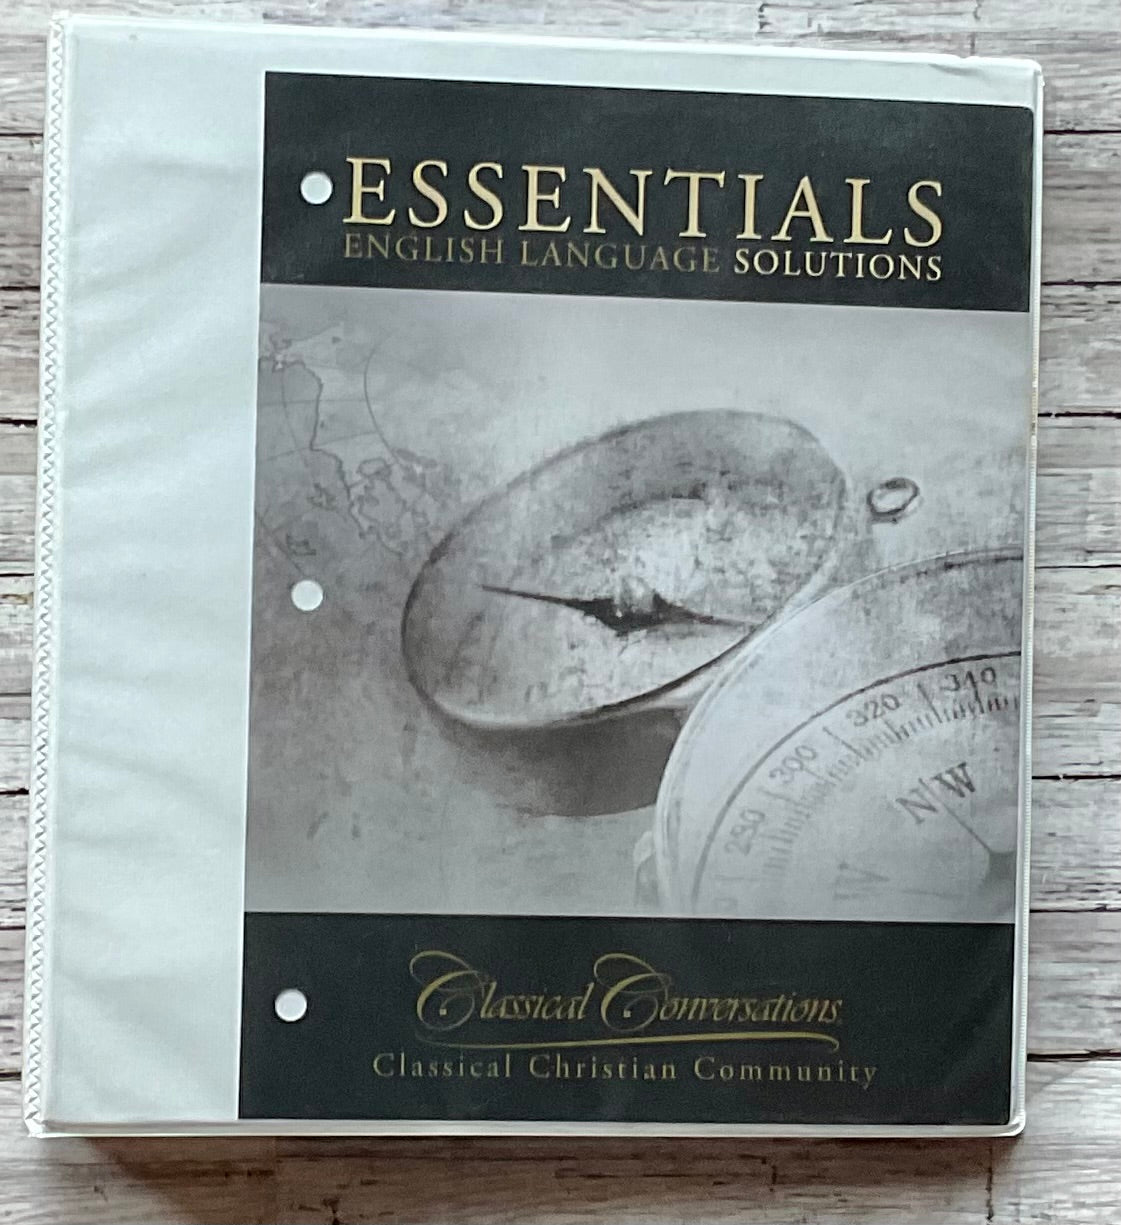 Classical Conversations Essentials Guide, 5th Edition - Anchored Homeschool Resource Center